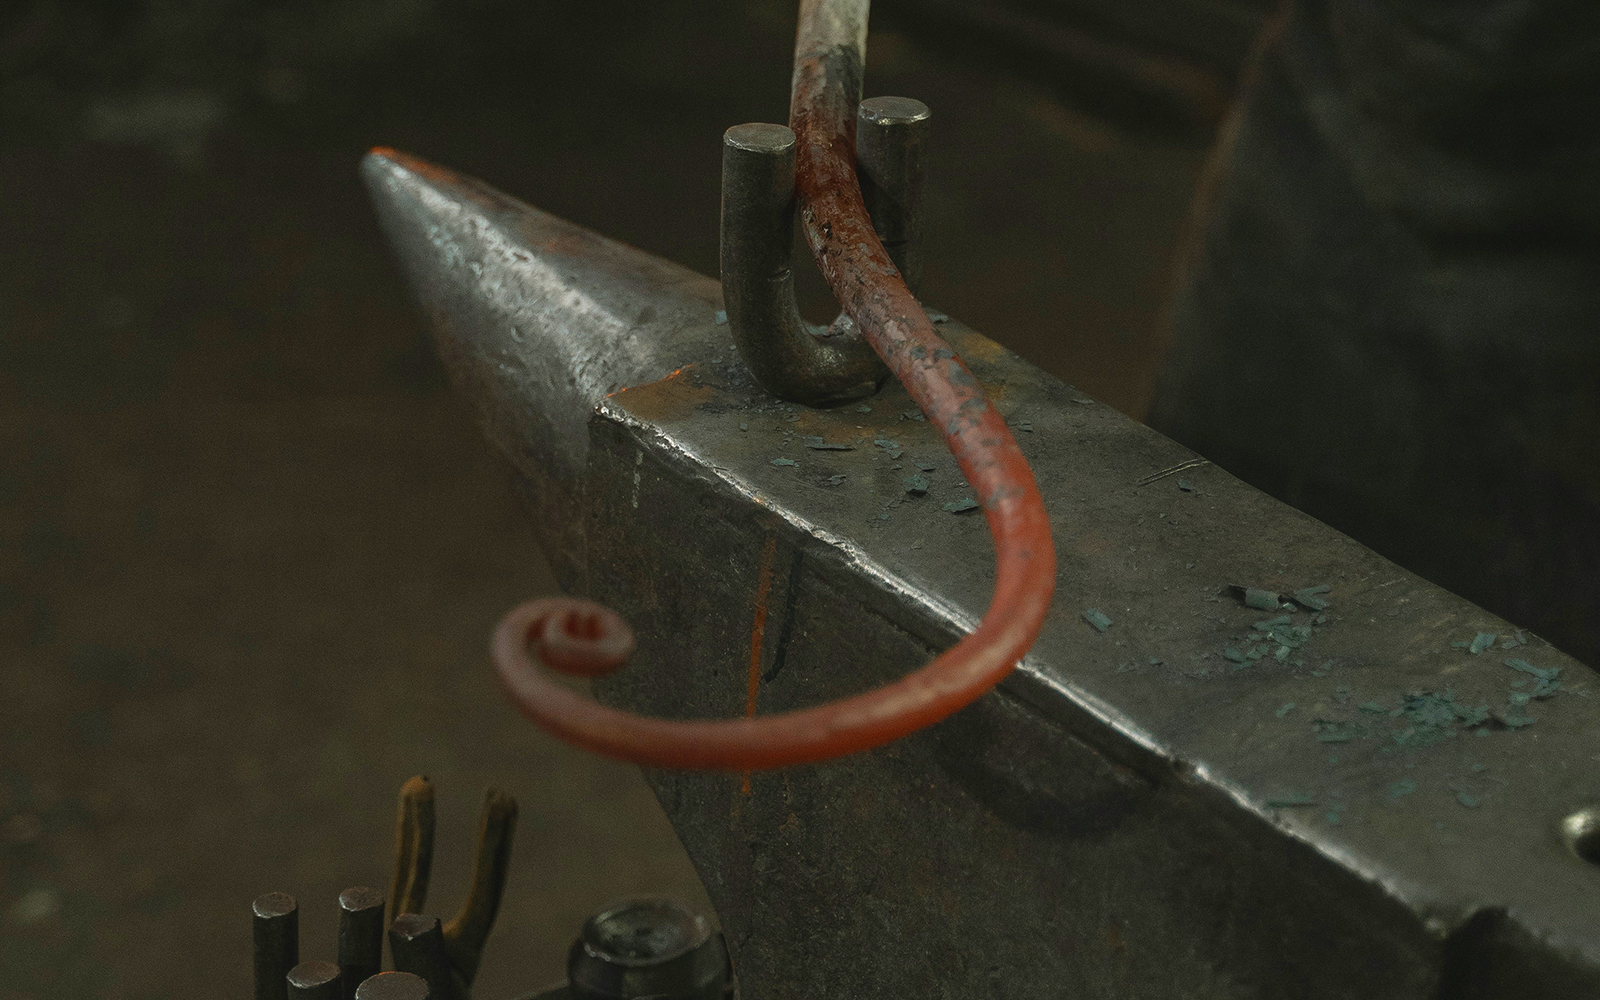 detail of a forged. hook